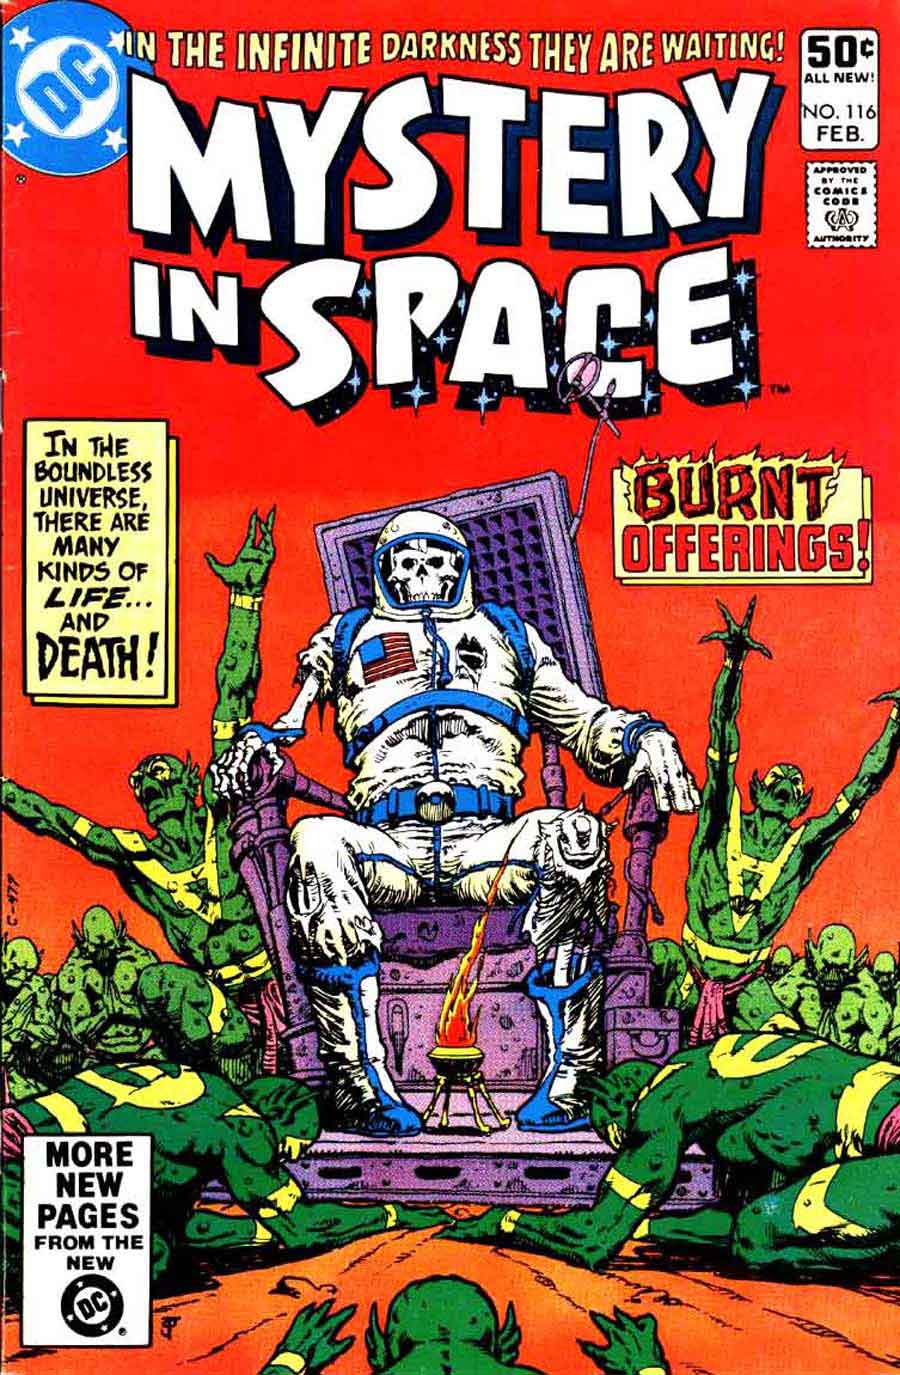 Mystery in Space #116 dc 1980s science fiction comic book cover art by Jim Starlin